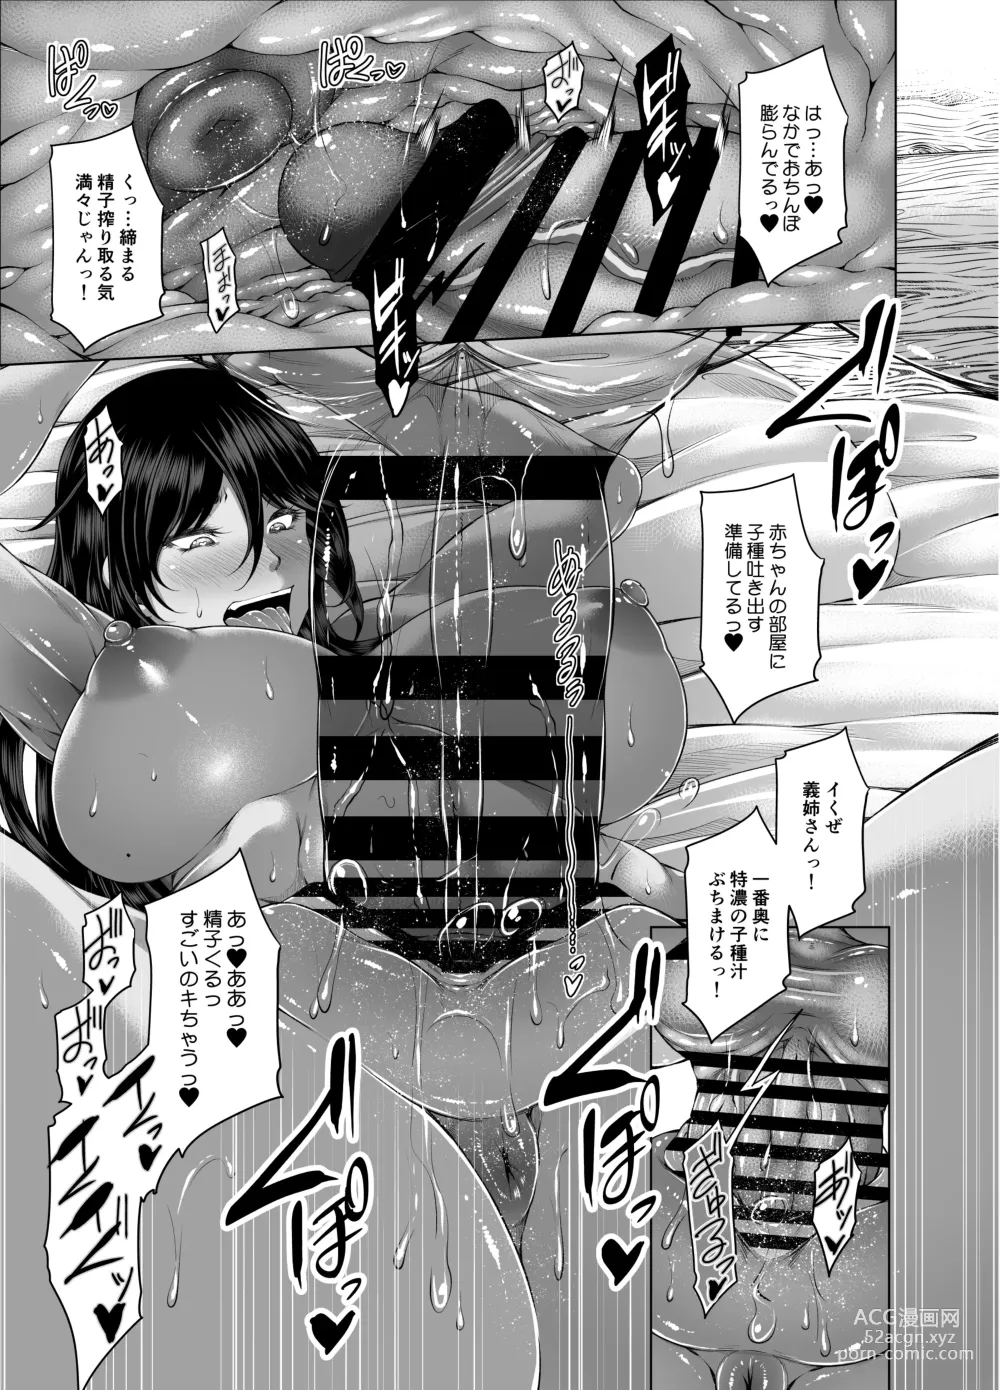 Page 40 of doujinshi 琉球勝気兄嫁は押しに弱くて欲求不満